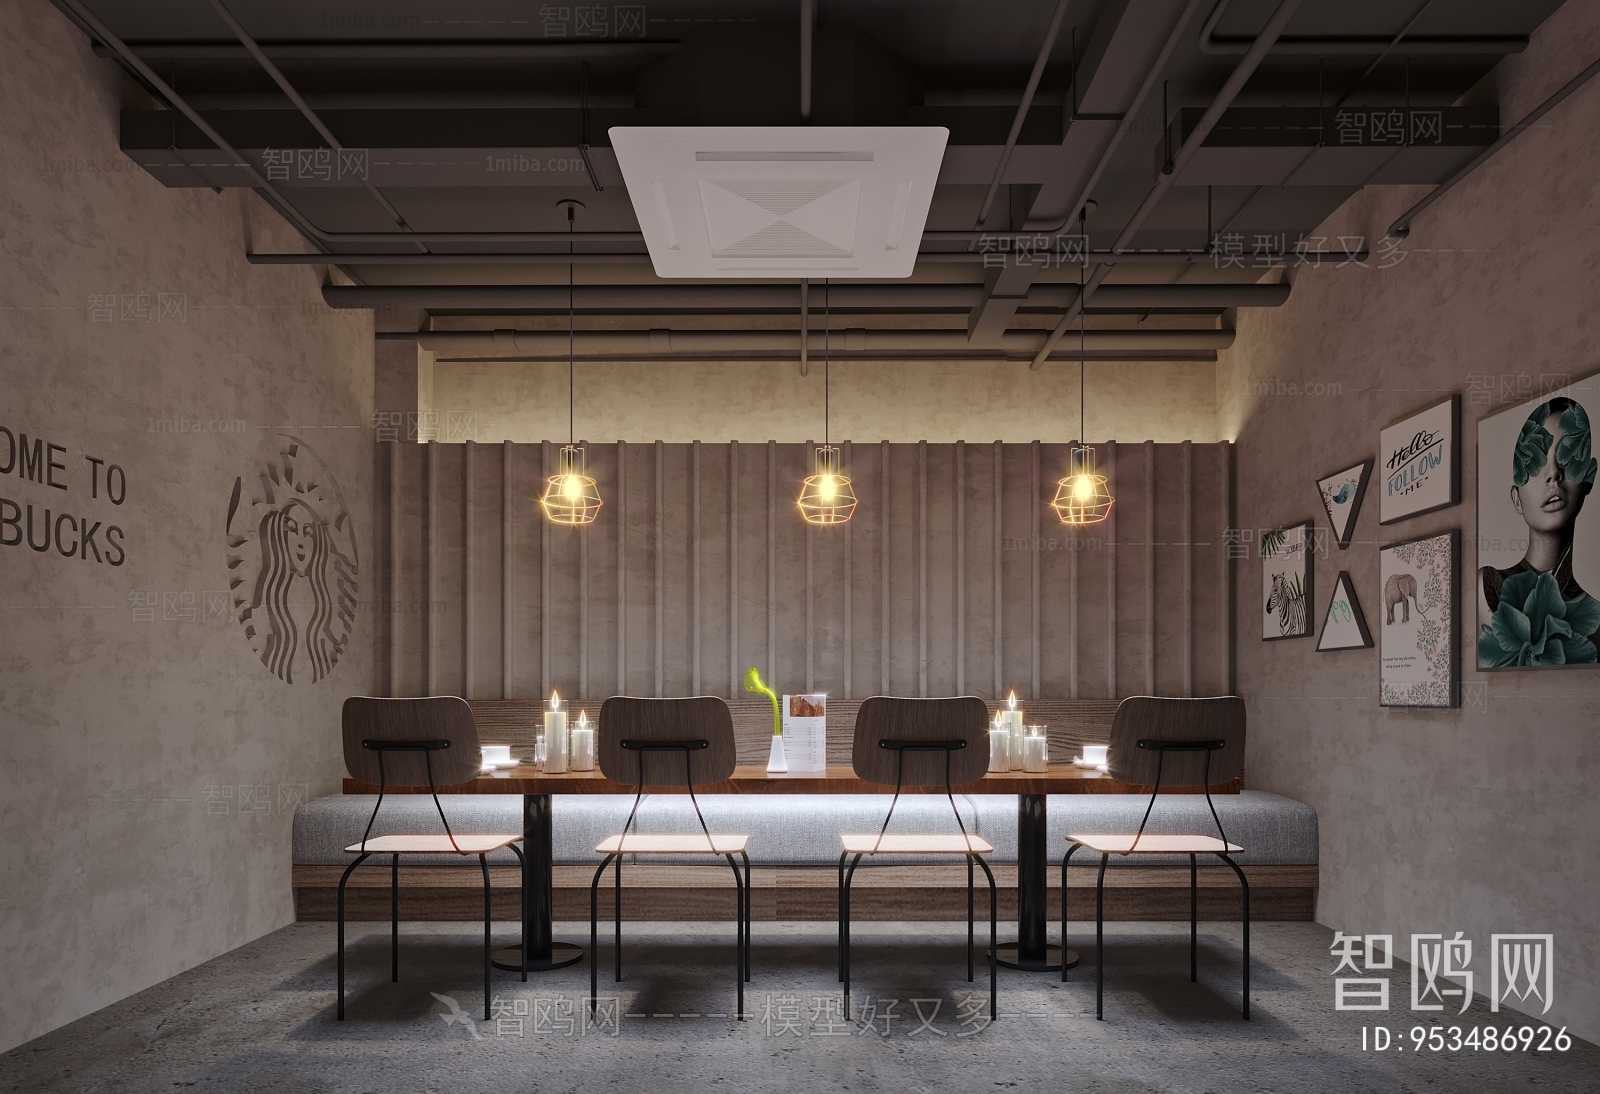 LOFT Industrial Style Cafe